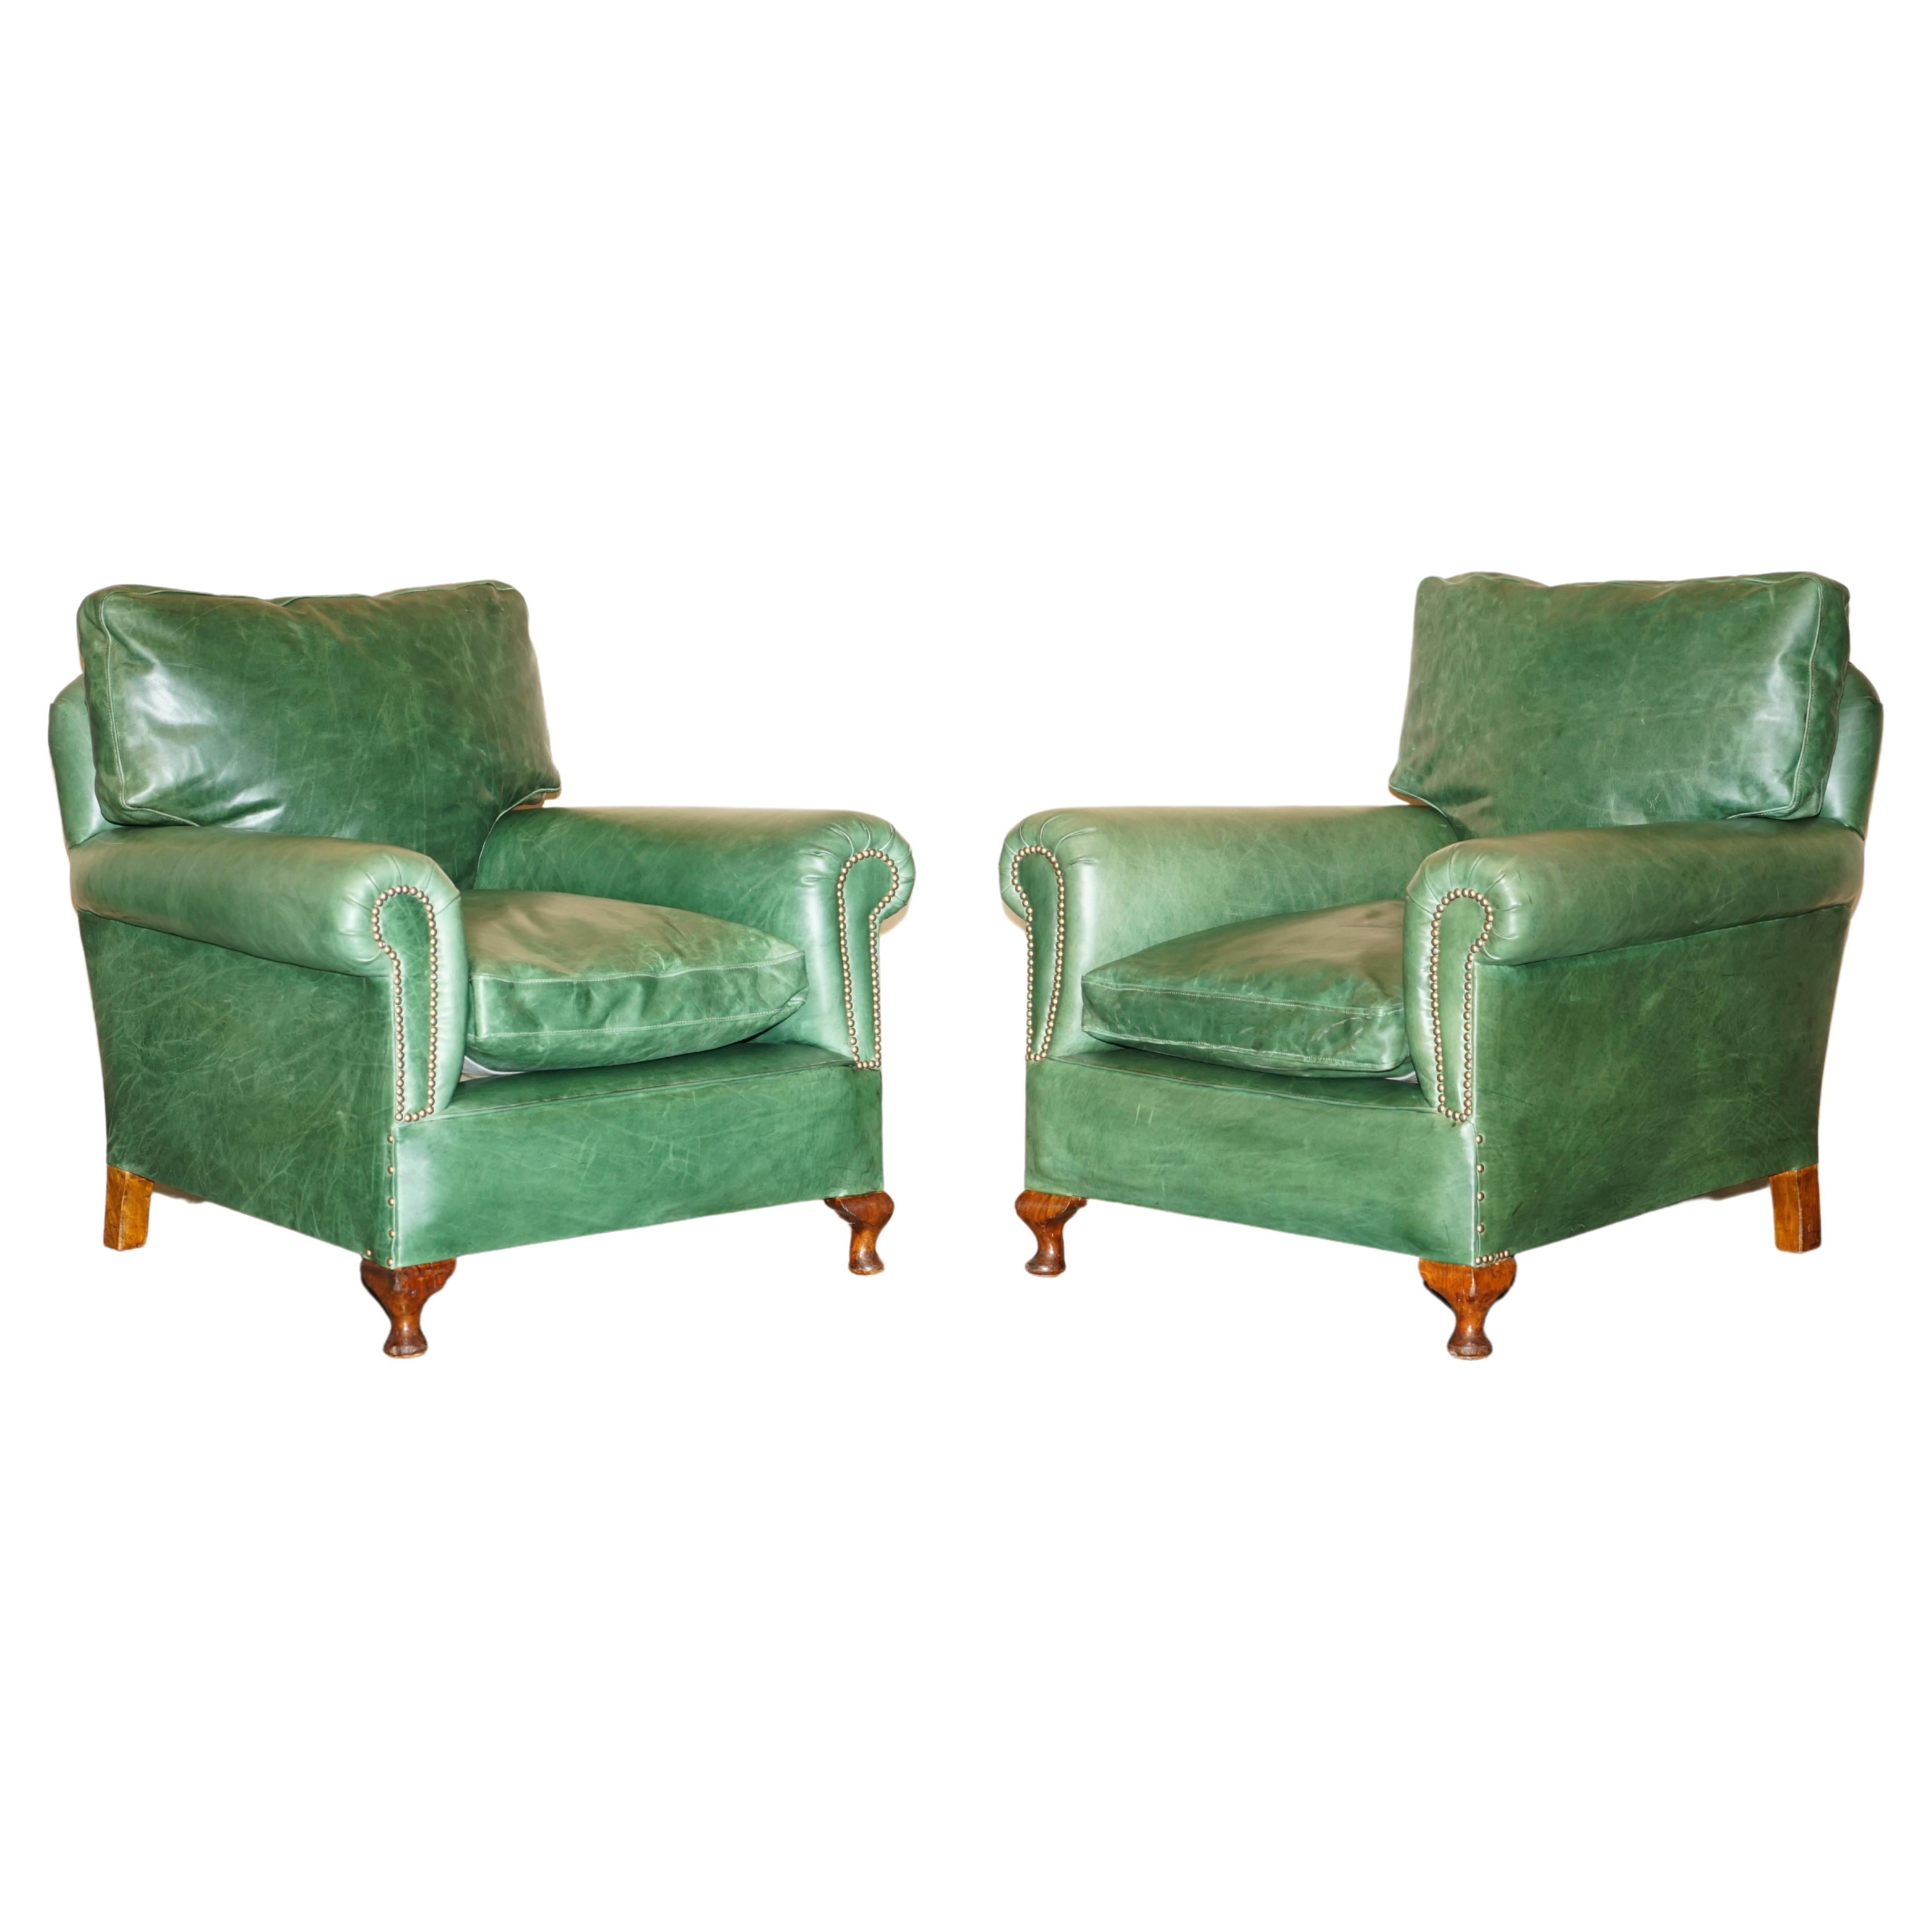 Pair of Antique Victorian Heritage Green Leather Upholstered Club Armchairs